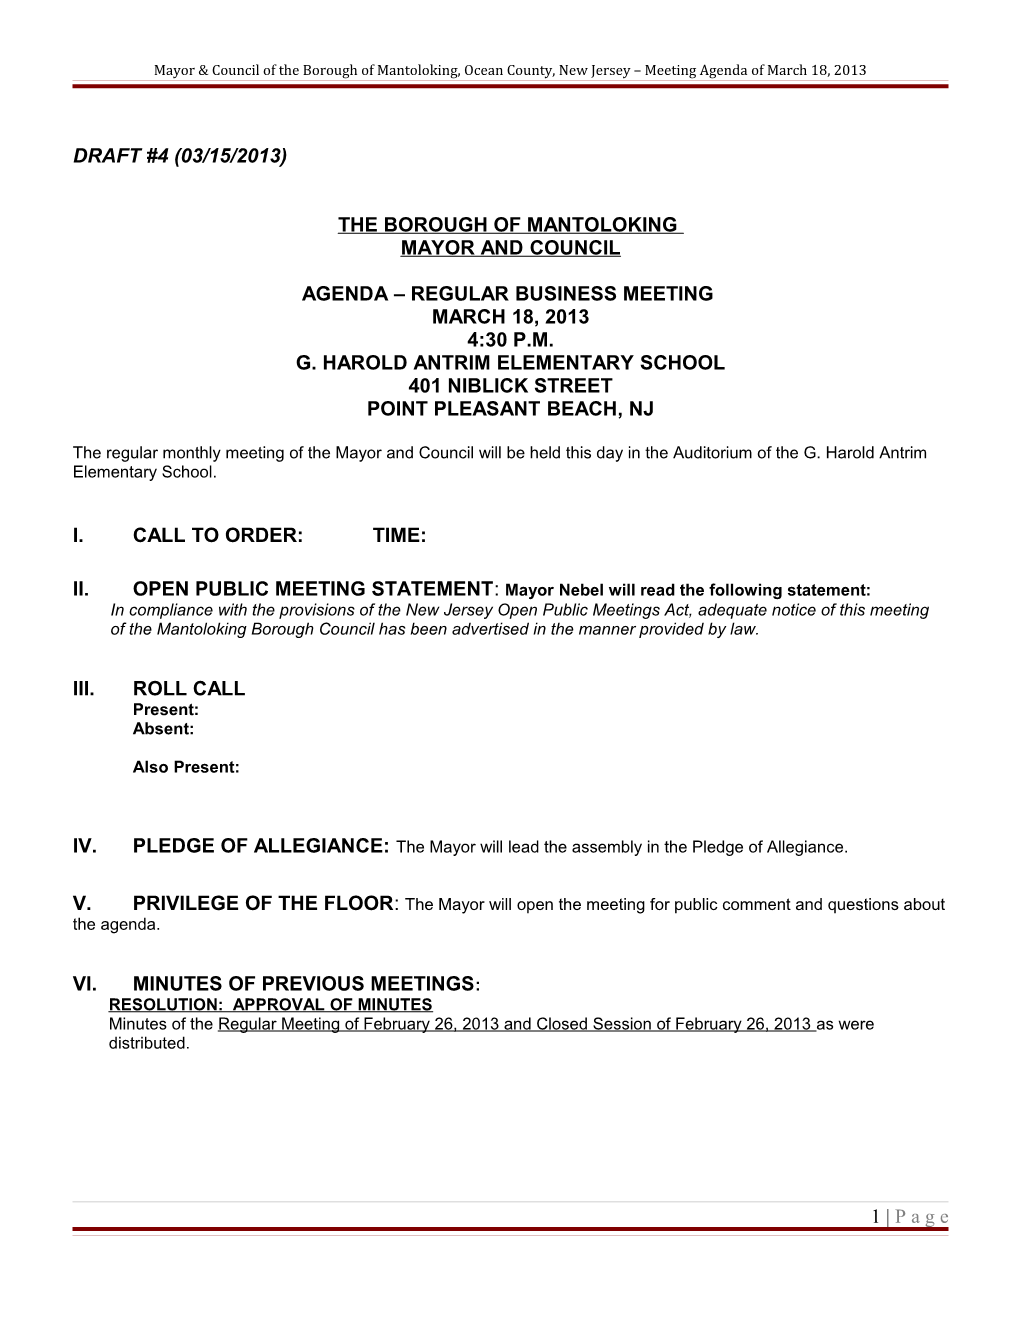 Mayor & Council of the Borough of Mantoloking, Ocean County, New Jersey Meeting Agenda